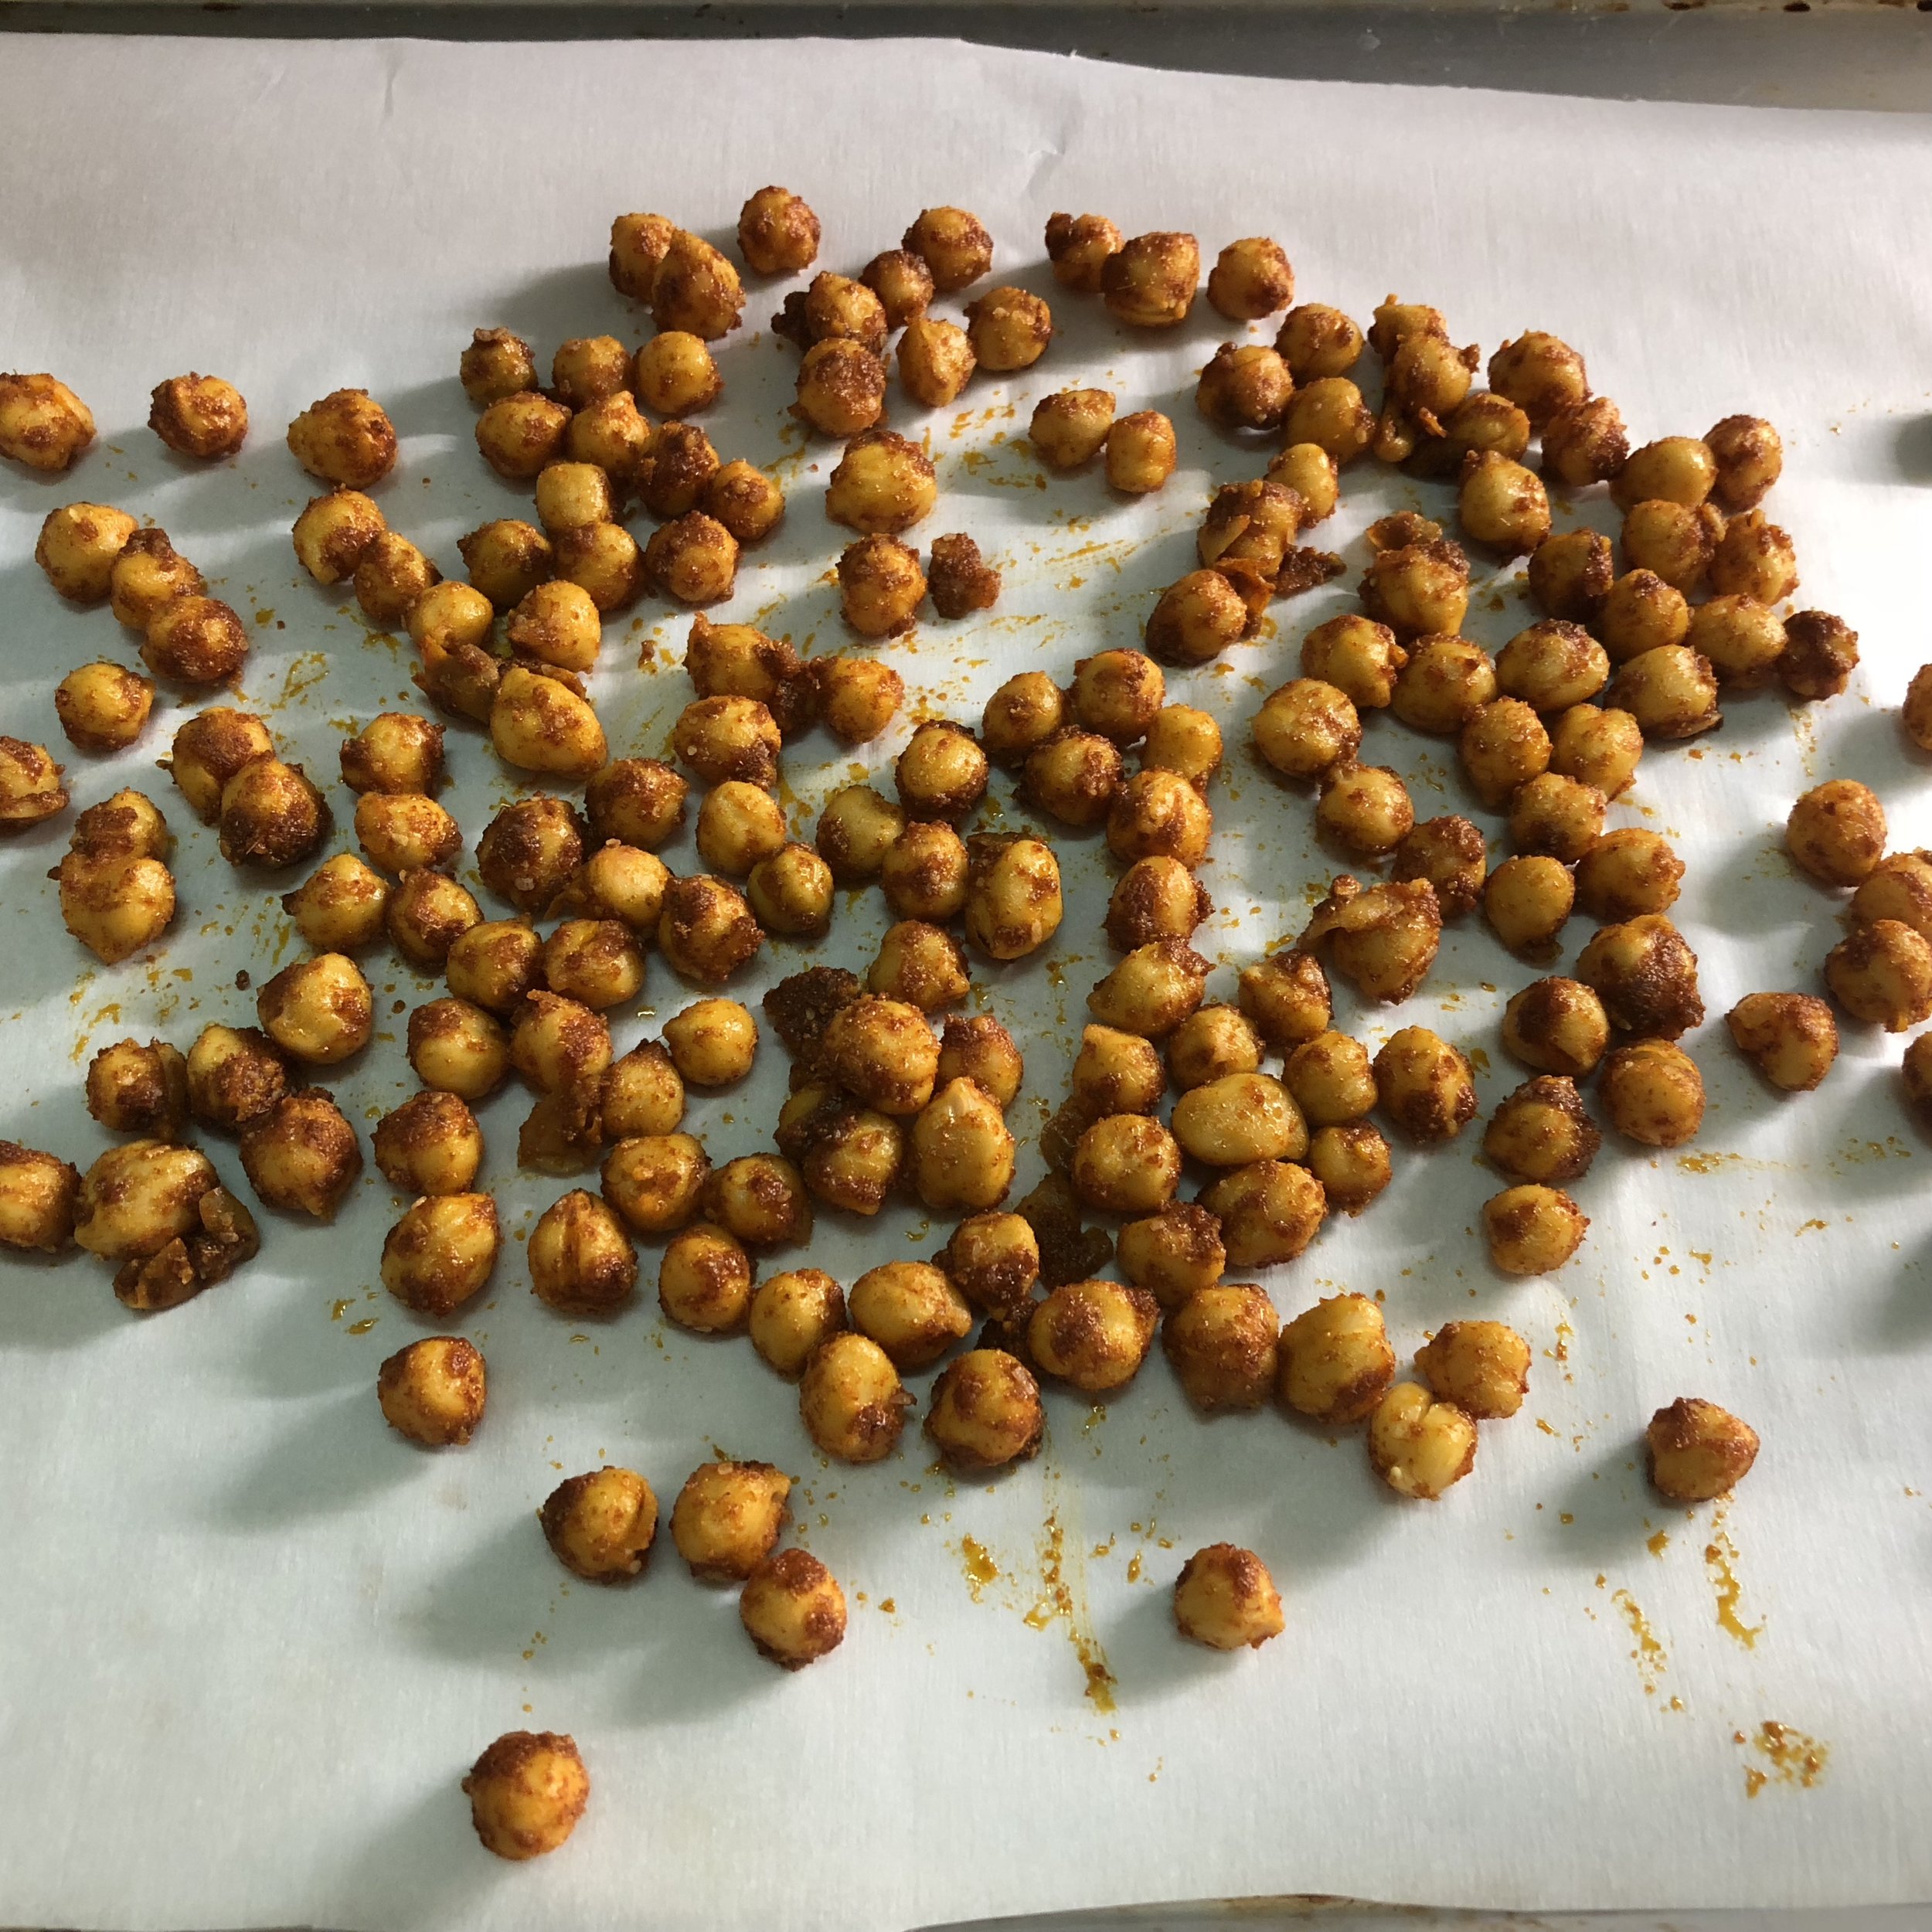 Spiced Roasted Chickpeas with Salad